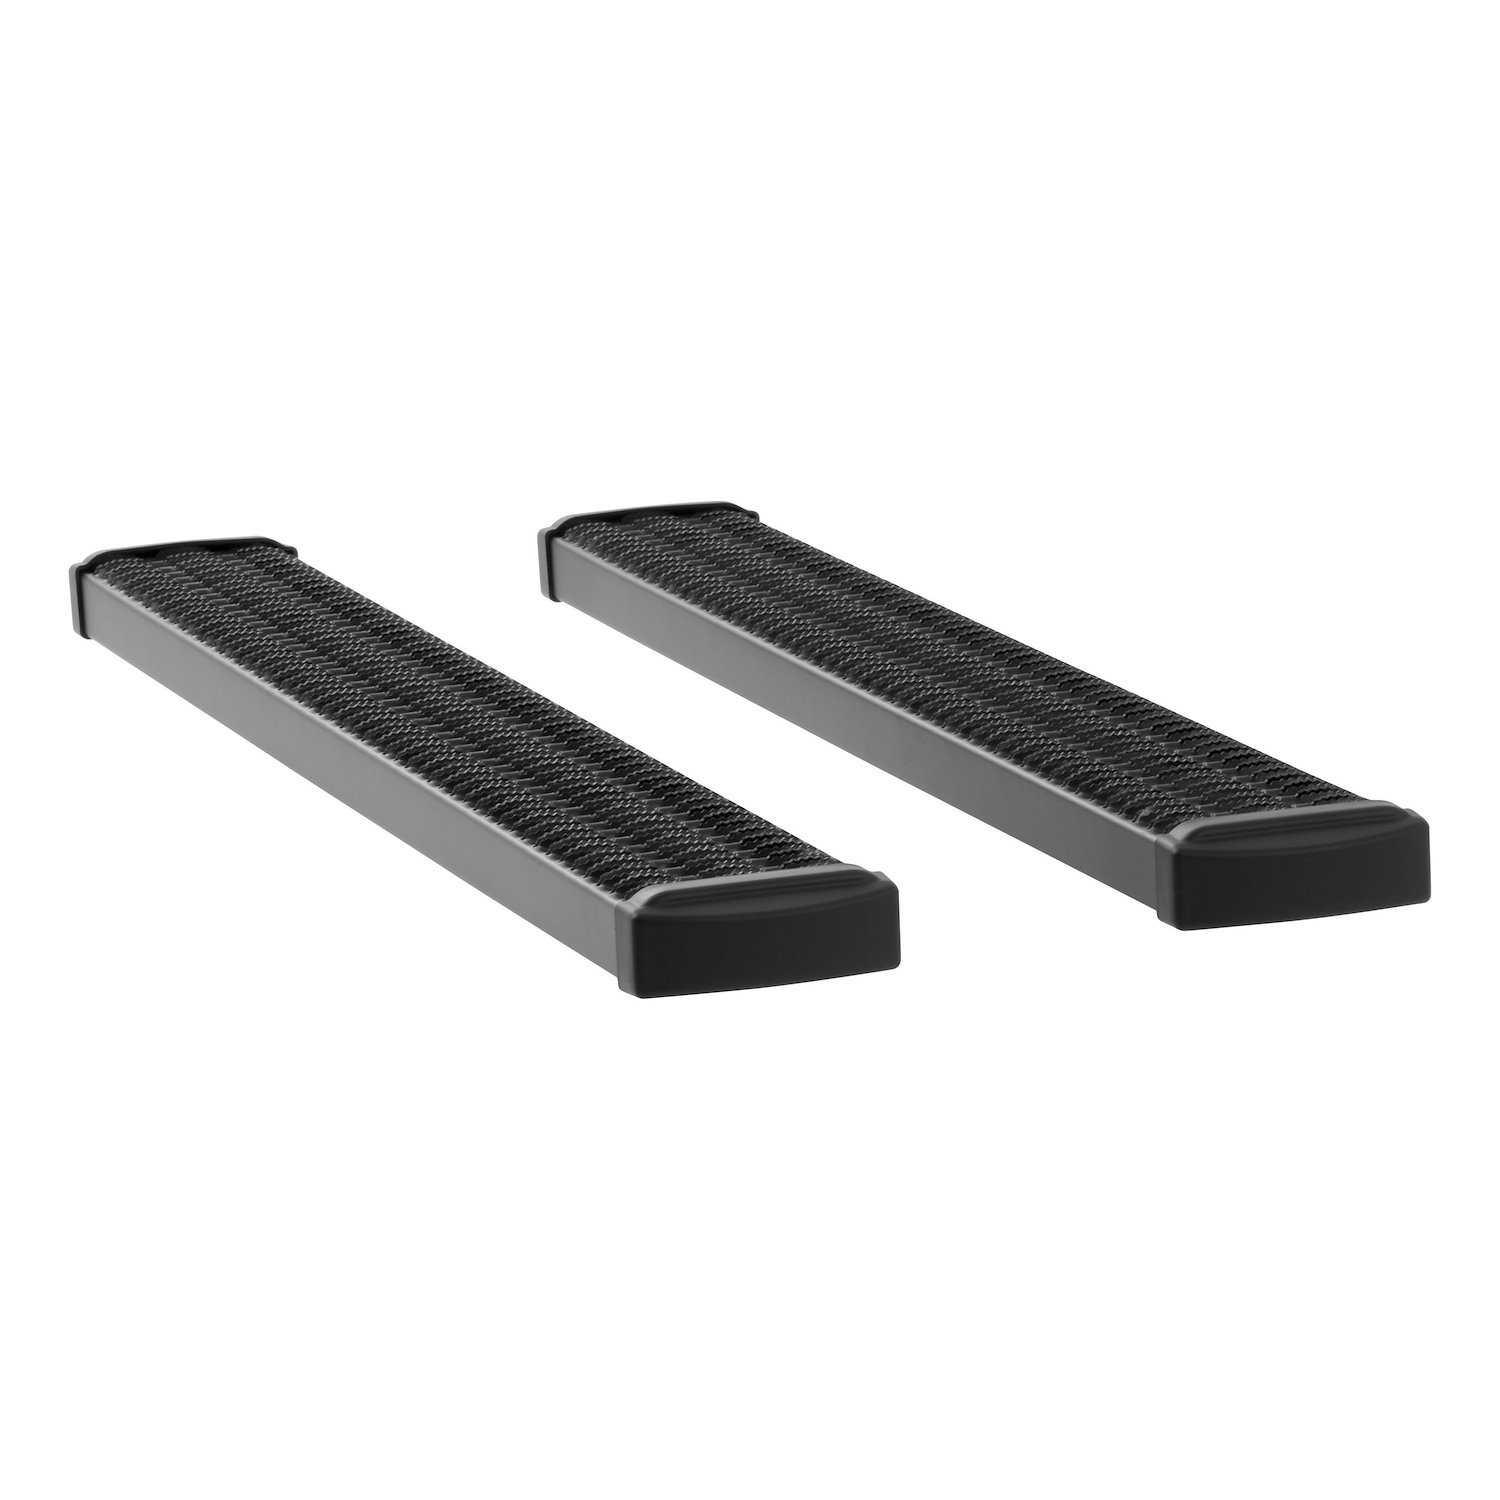 415060-401721 Grip Step 7 in. x 60 in. Black Aluminum Running Boards Fits Select Ford Super Duty